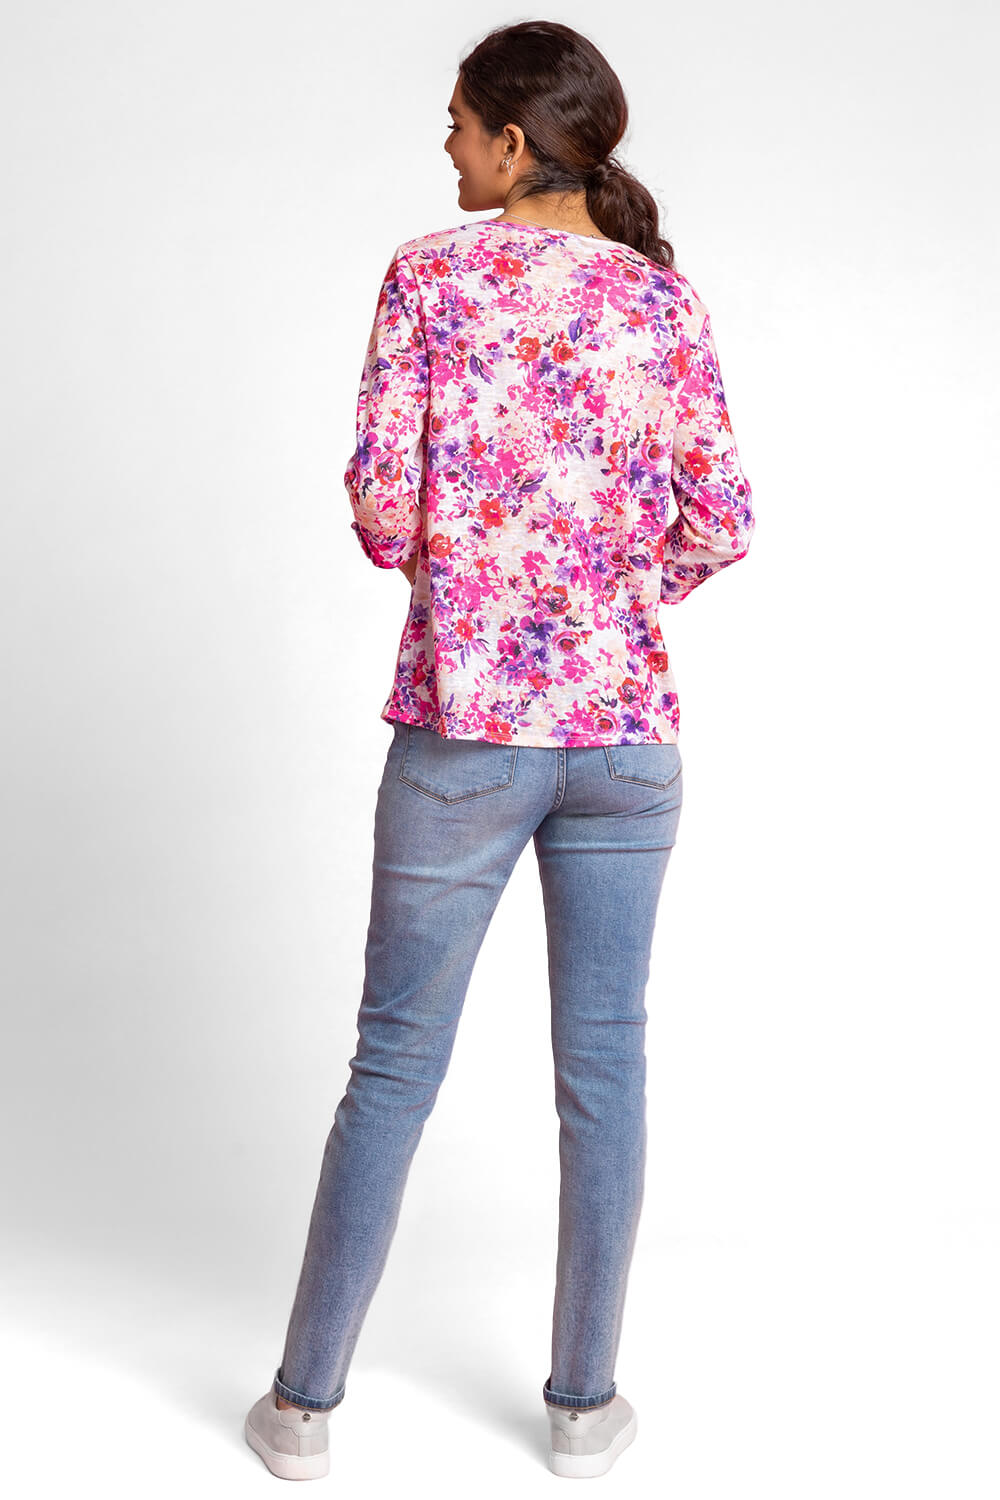 PINK Floral Print Jersey Pleat Detail Top, Image 2 of 4